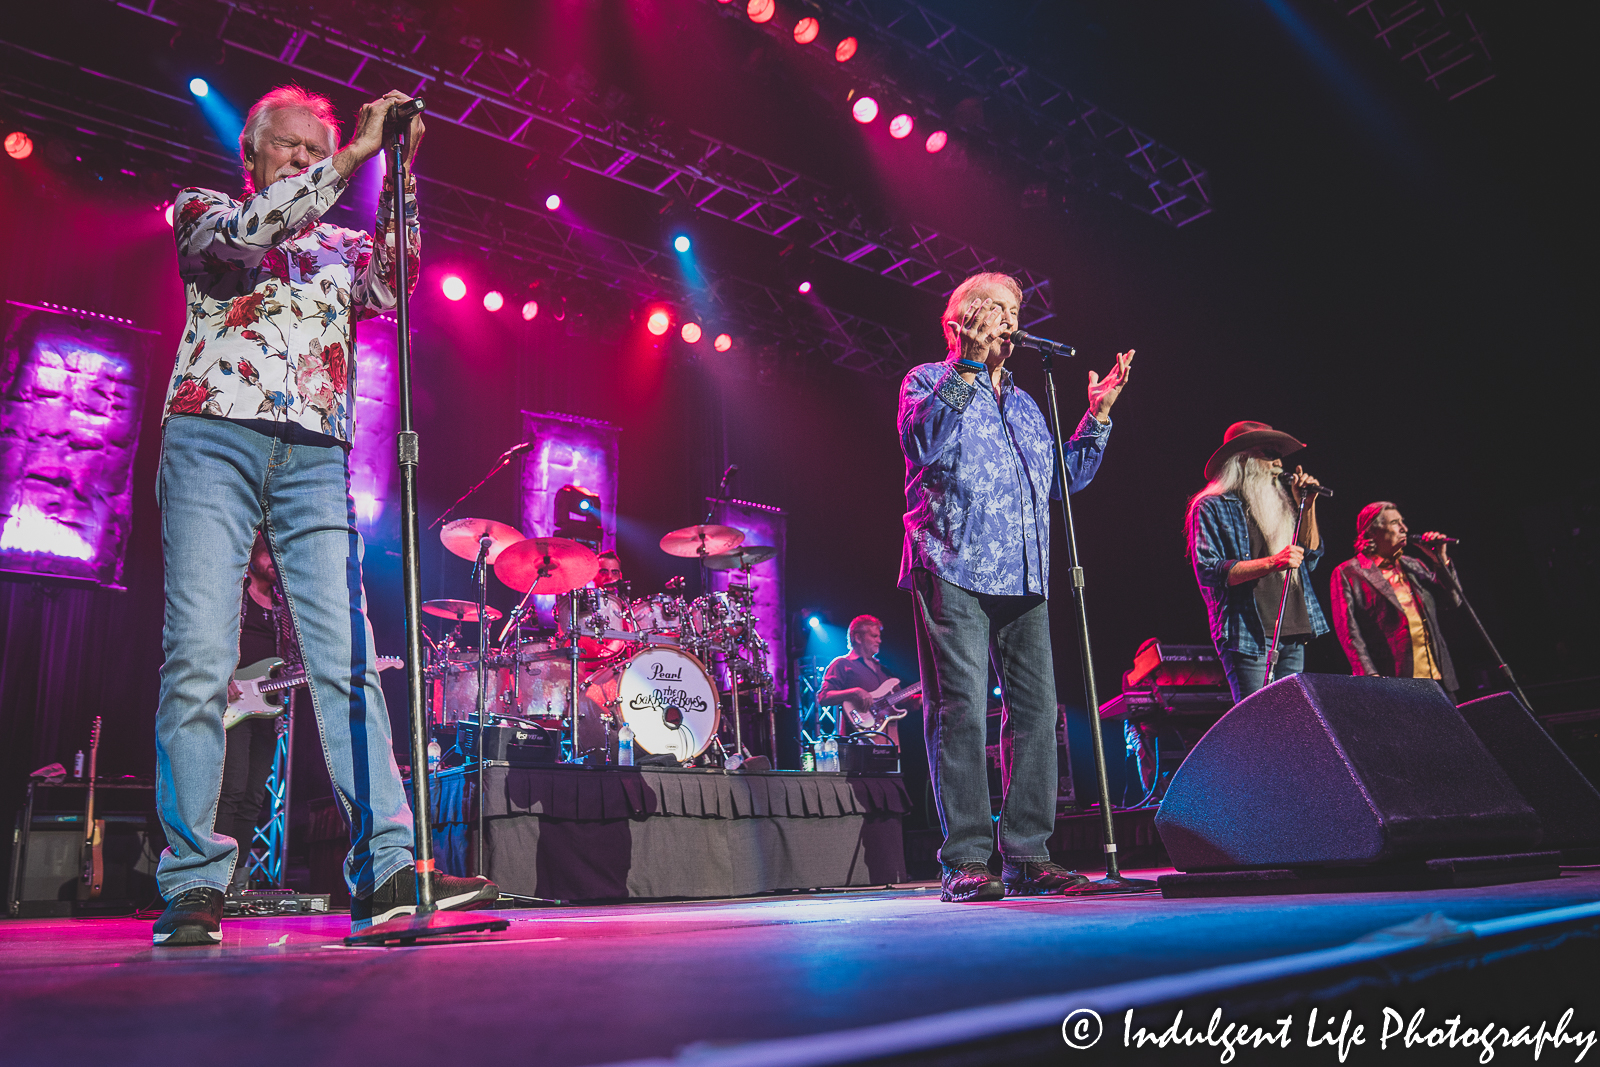 The Oak Ridge Boys kicking off their concert at Ameristar Casino in Kansas City, MO with the 1984 chart-topping country hit "Everyday" on September 24, 2021.